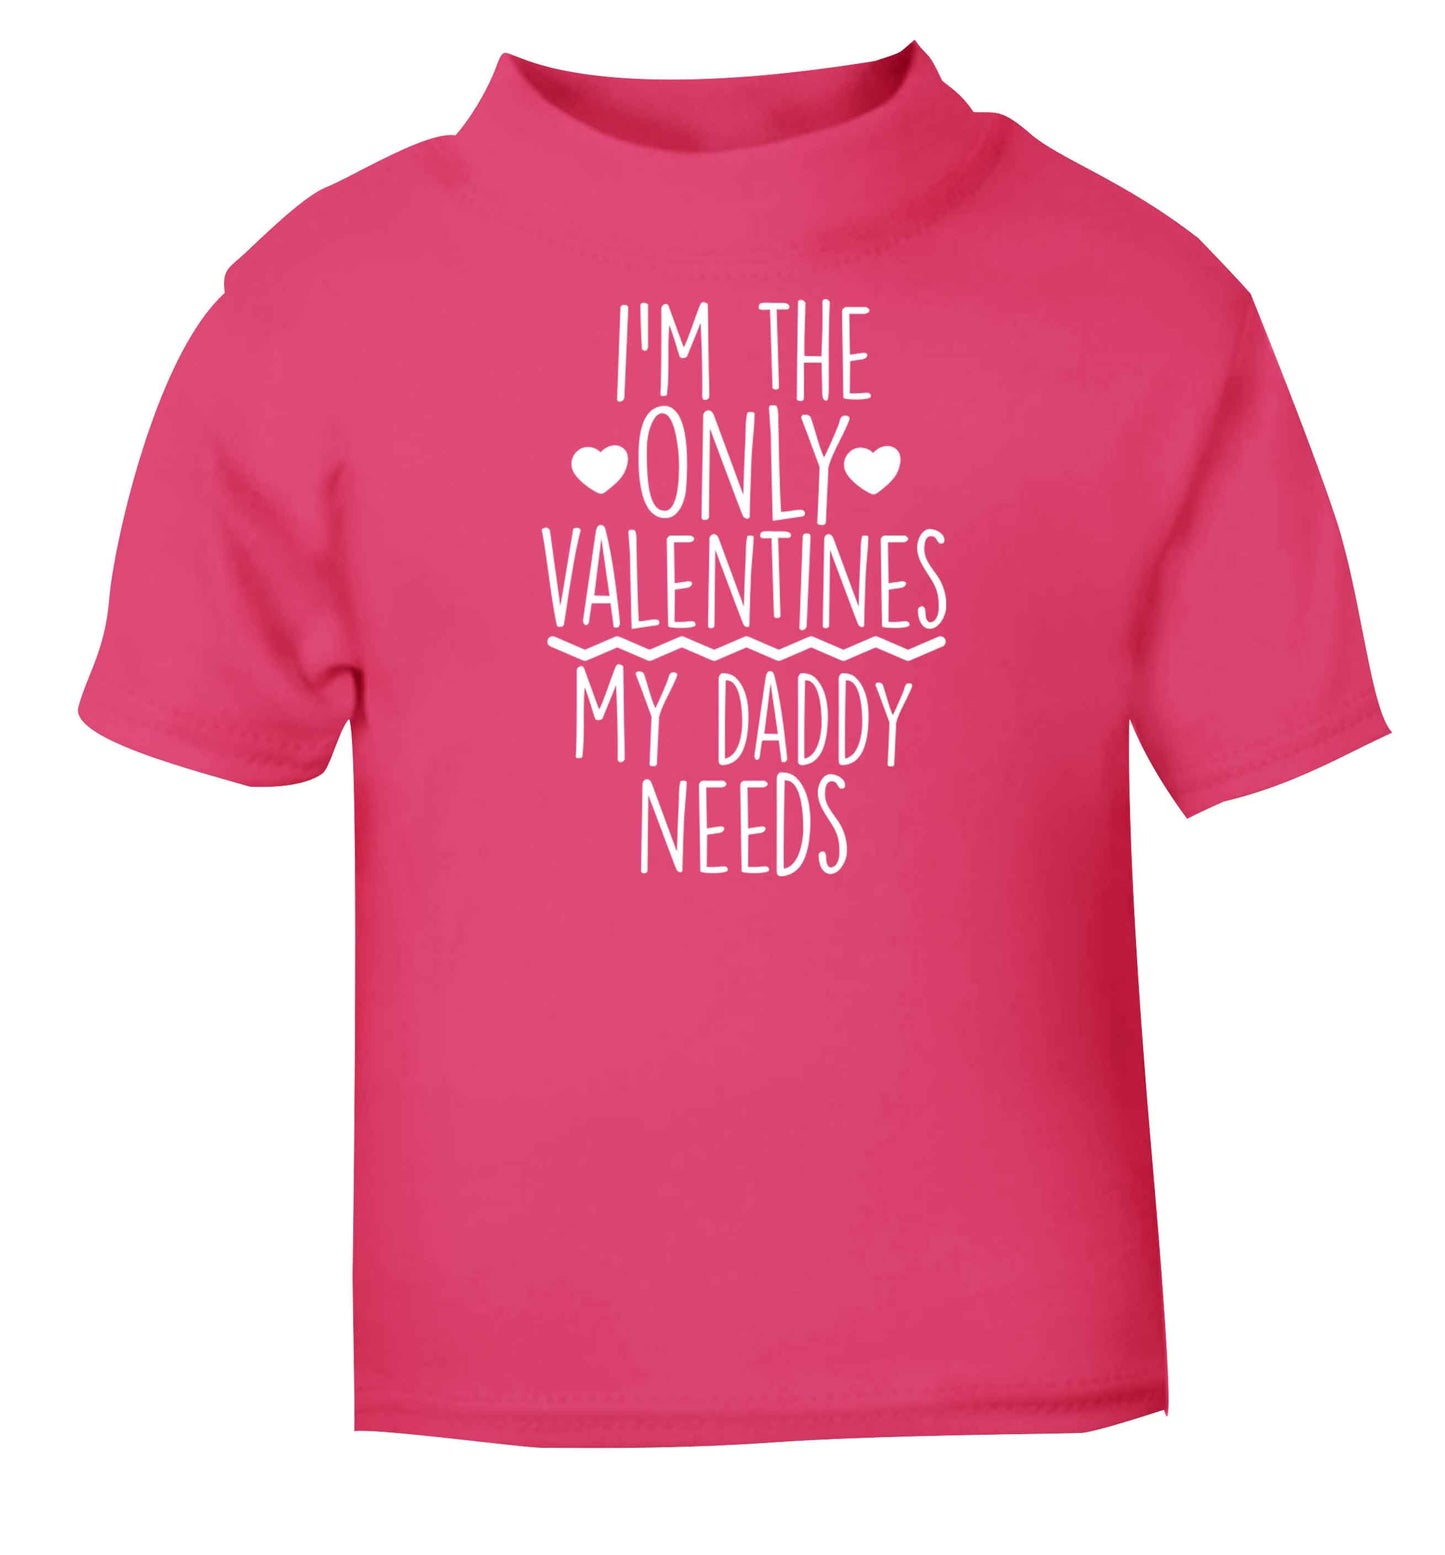 I'm the only valentines my daddy needs pink baby toddler Tshirt 2 Years